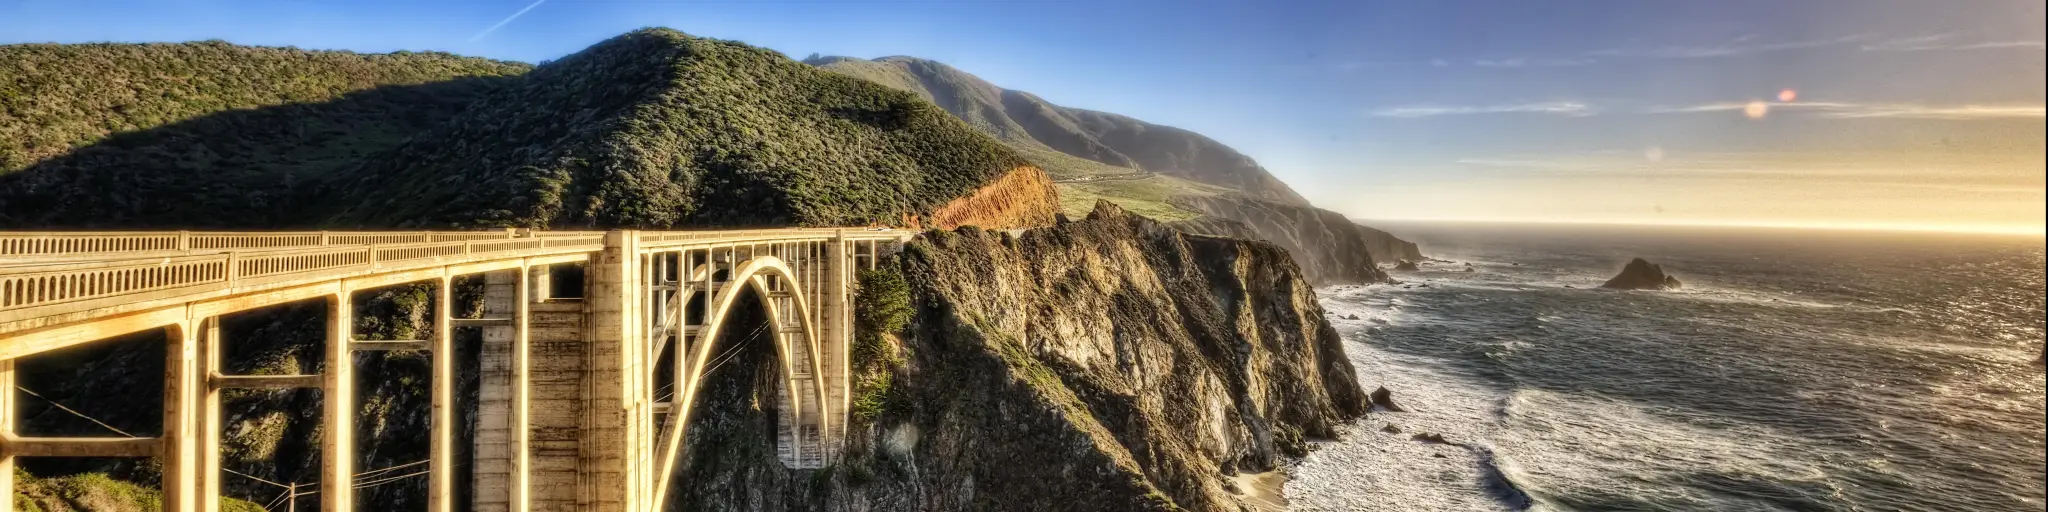 Bixby Creek Bridge, USA with the bridge and hills in the distance.